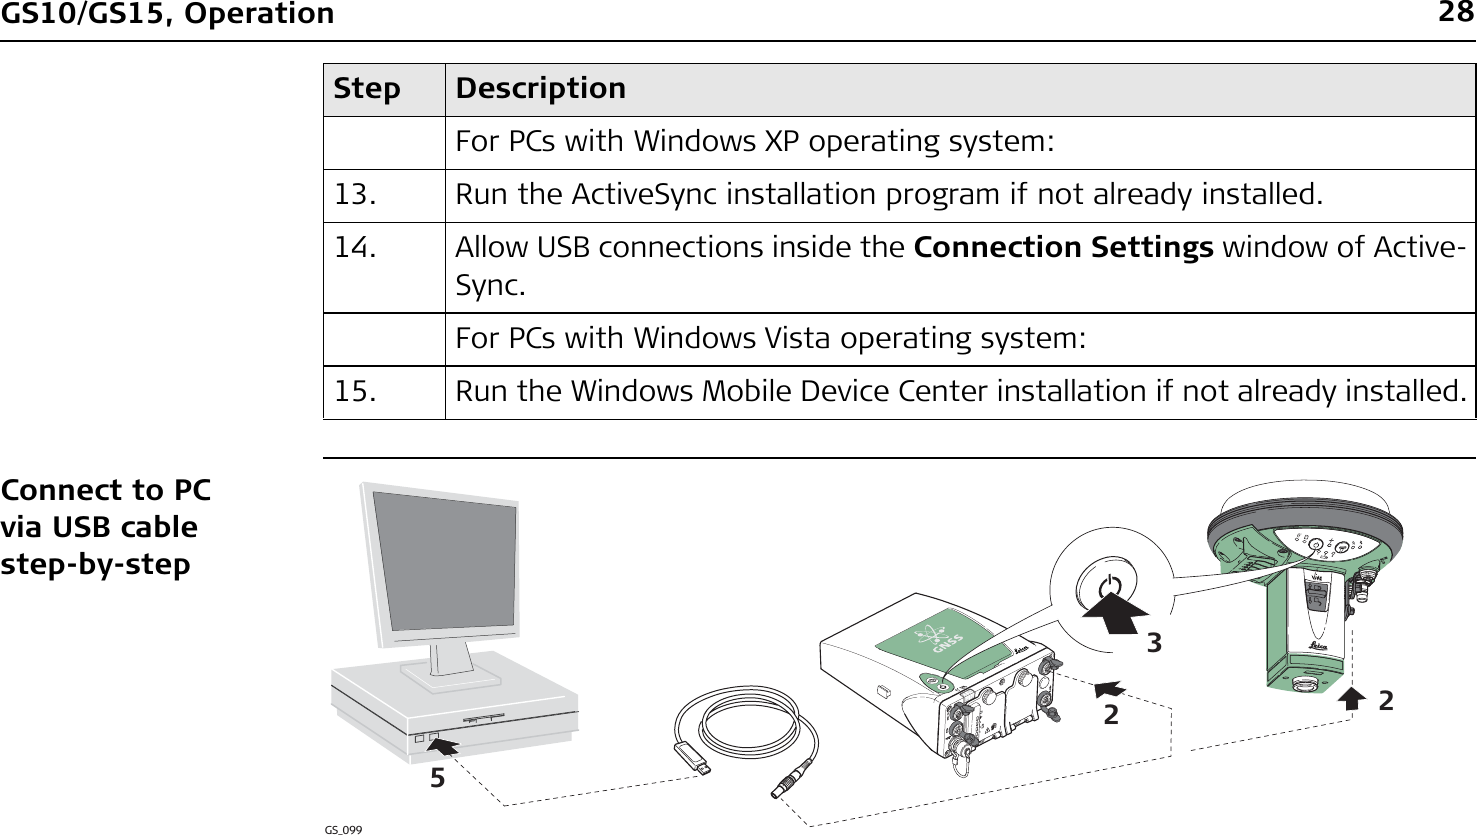 28GS10/GS15, OperationConnect to PC via USB cable step-by-stepFor PCs with Windows XP operating system:13. Run the ActiveSync installation program if not already installed.14. Allow USB connections inside the Connection Settings window of Active-Sync.For PCs with Windows Vista operating system:15. Run the Windows Mobile Device Center installation if not already installed.Step DescriptionGS_0992235